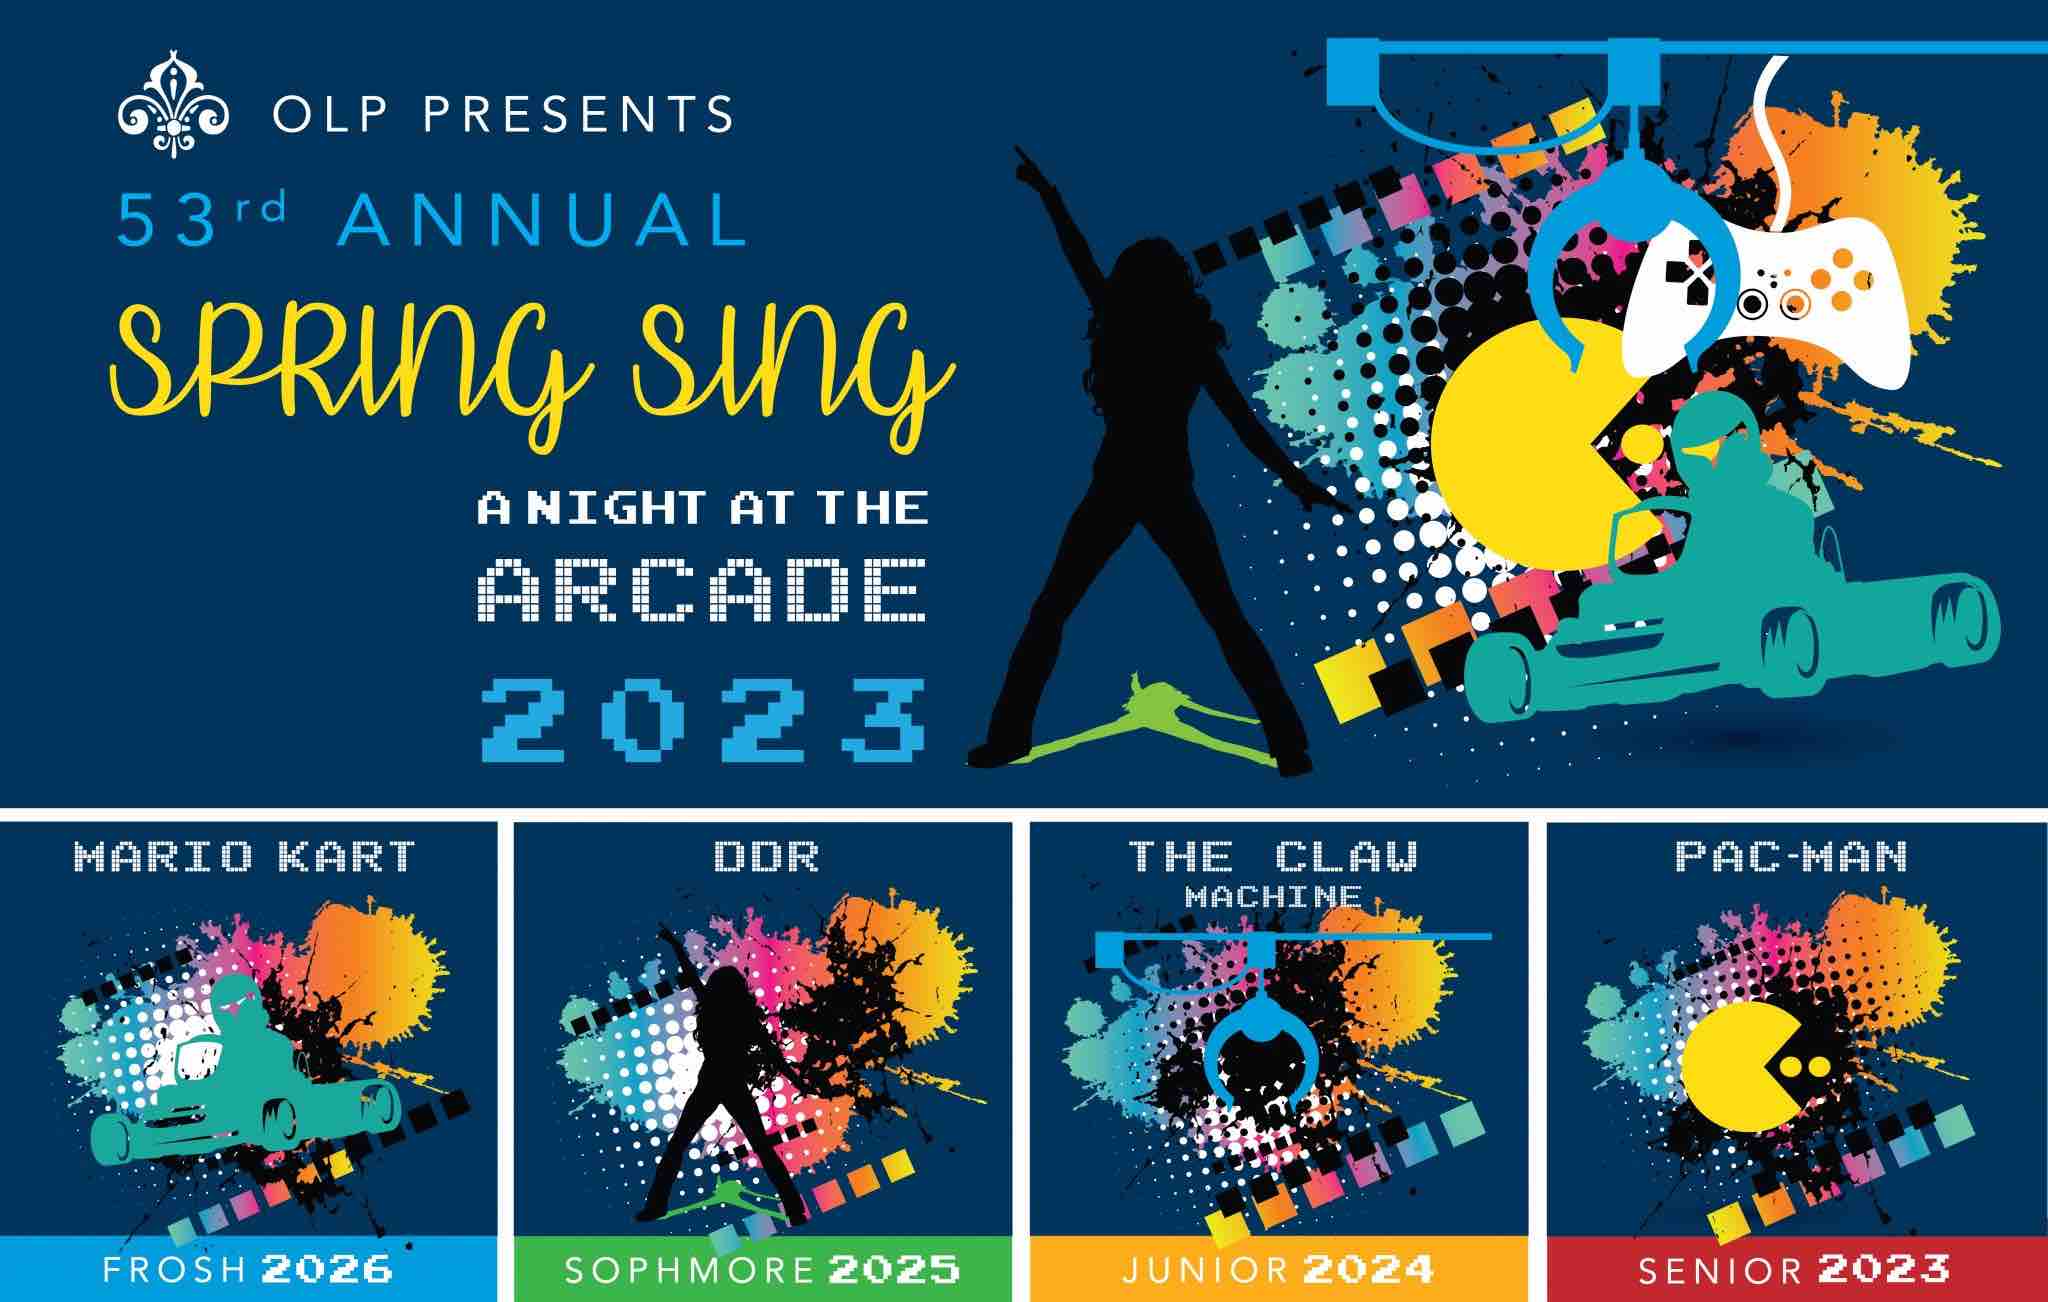 Our Lady of Peace Spring Sing: Into the Arcade at San Diego Civic Theatre